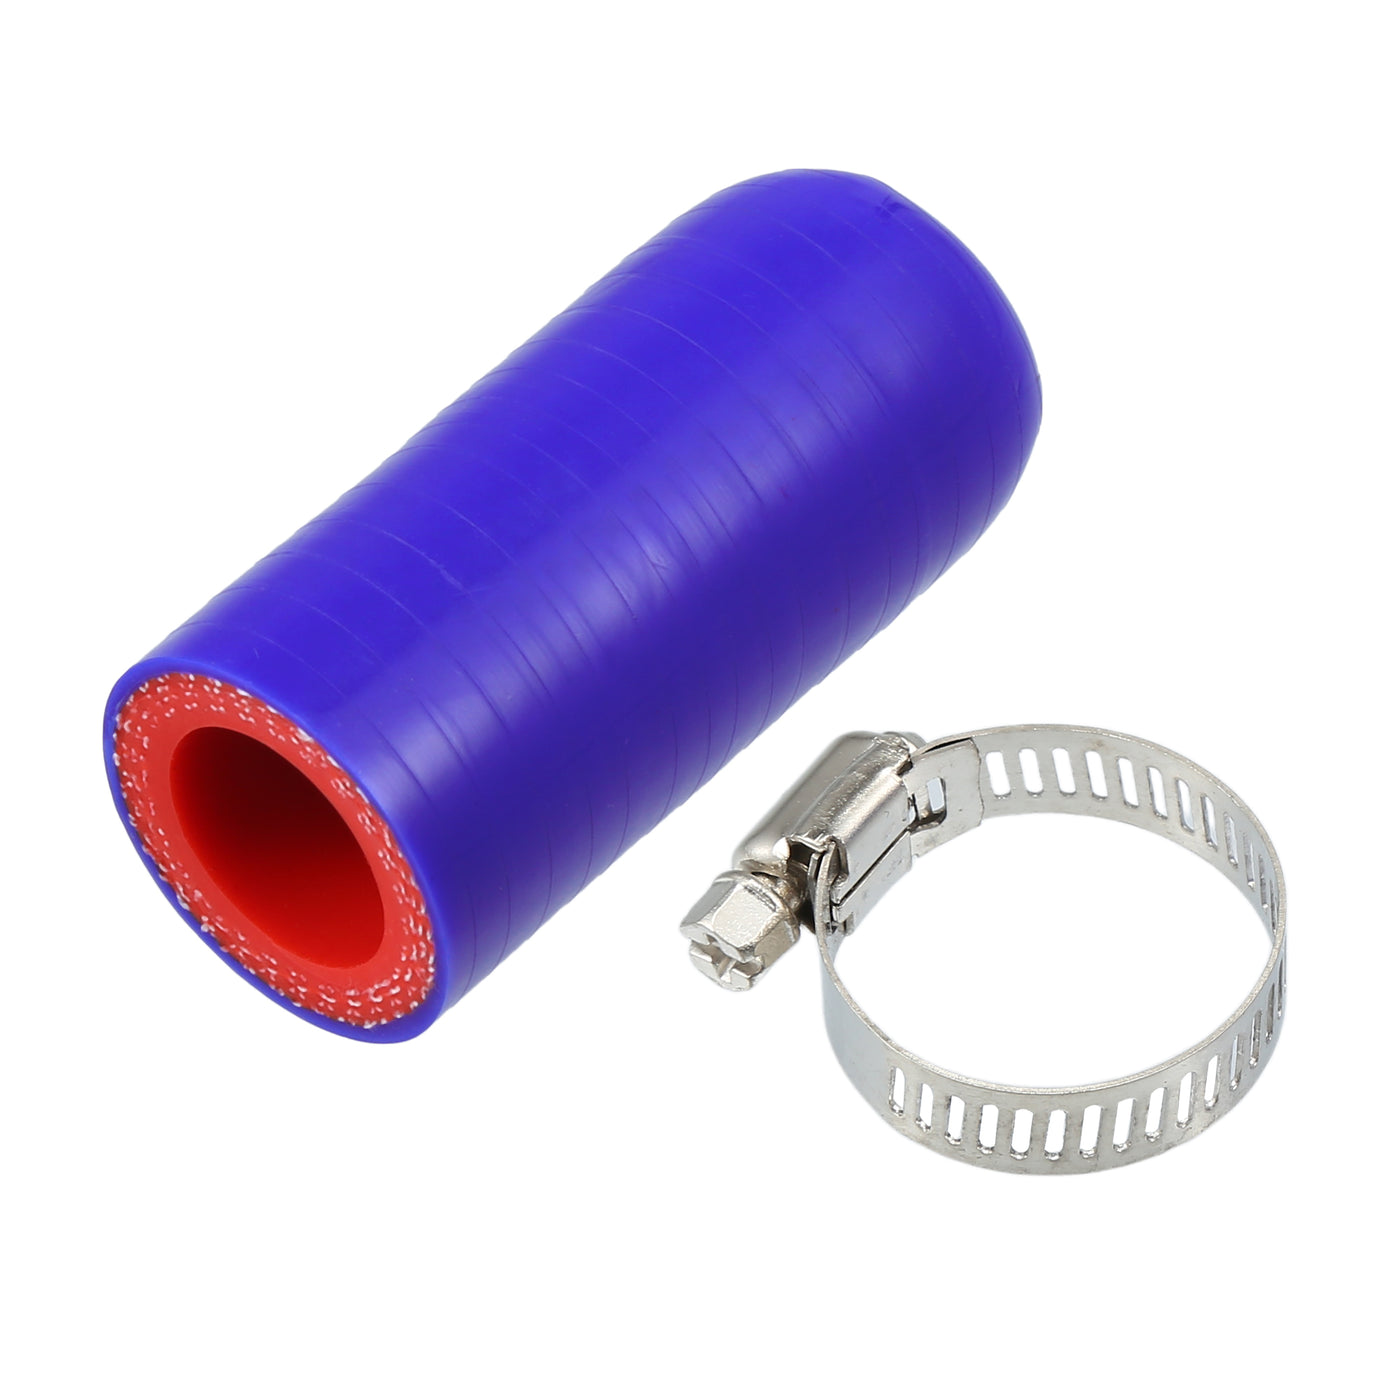 A ABSOPRO Universal Silicone Coolant Cap Intake Vacuum Hose End Plug 18mm 0.71" ID Car Coolant Heater Bypass Vacuum Water Port Silicone Blue